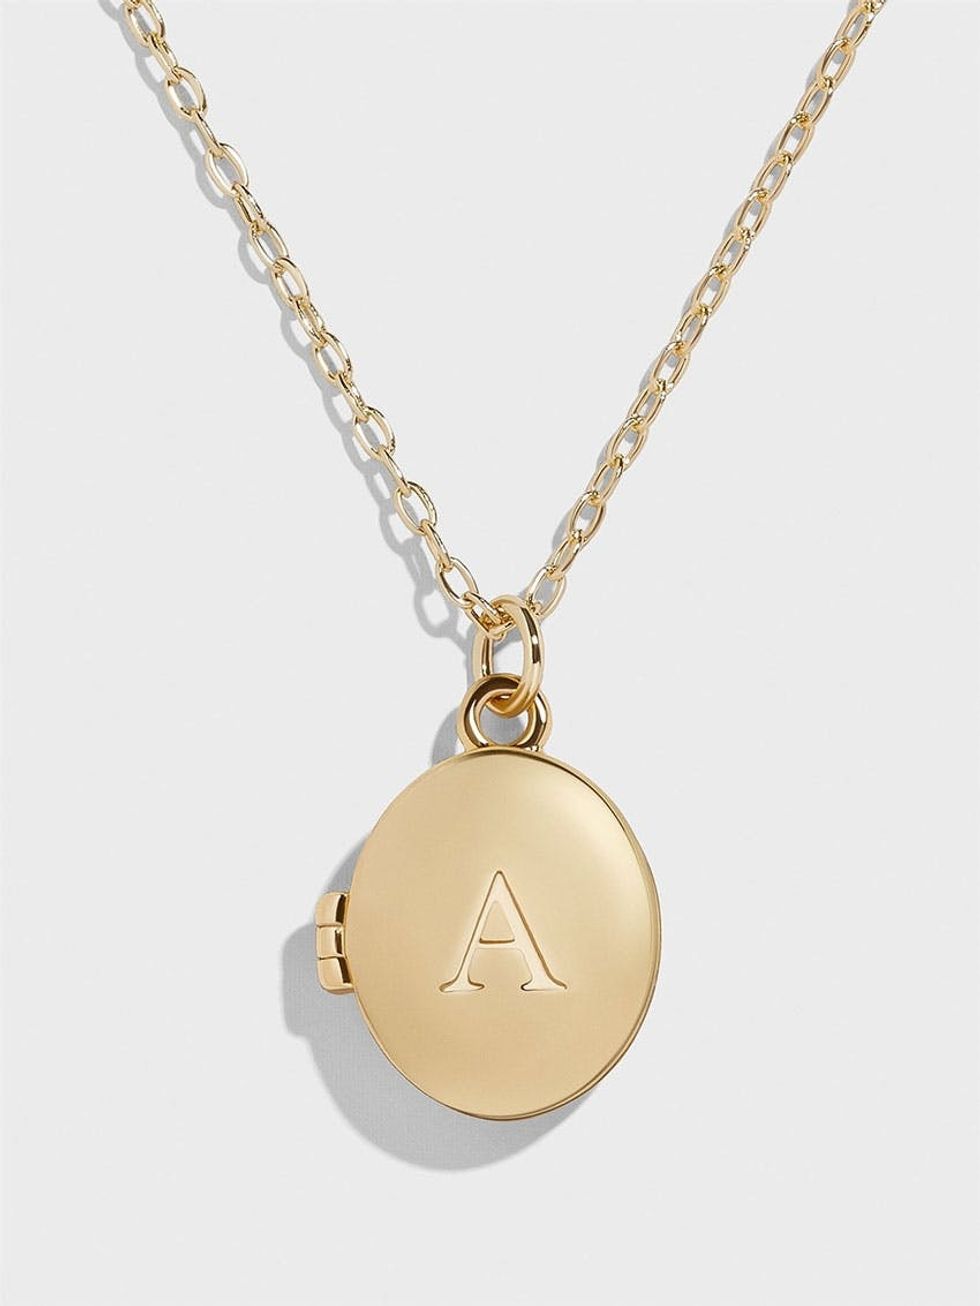 13 Lockets That Are Both Sentimental and Stylish - Brit + Co